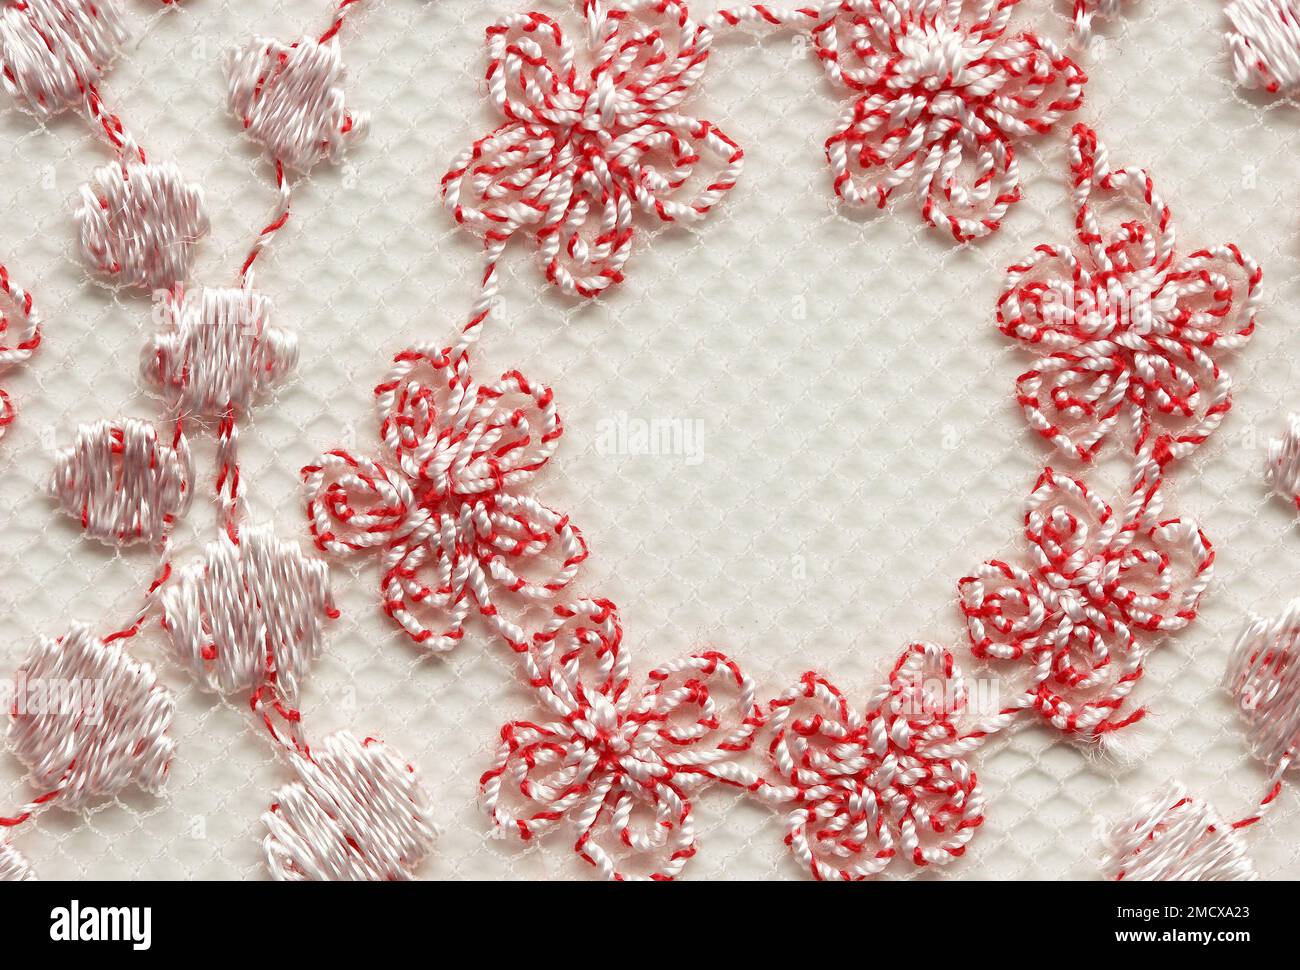 85,746 Red Lace Texture Images, Stock Photos, 3D objects